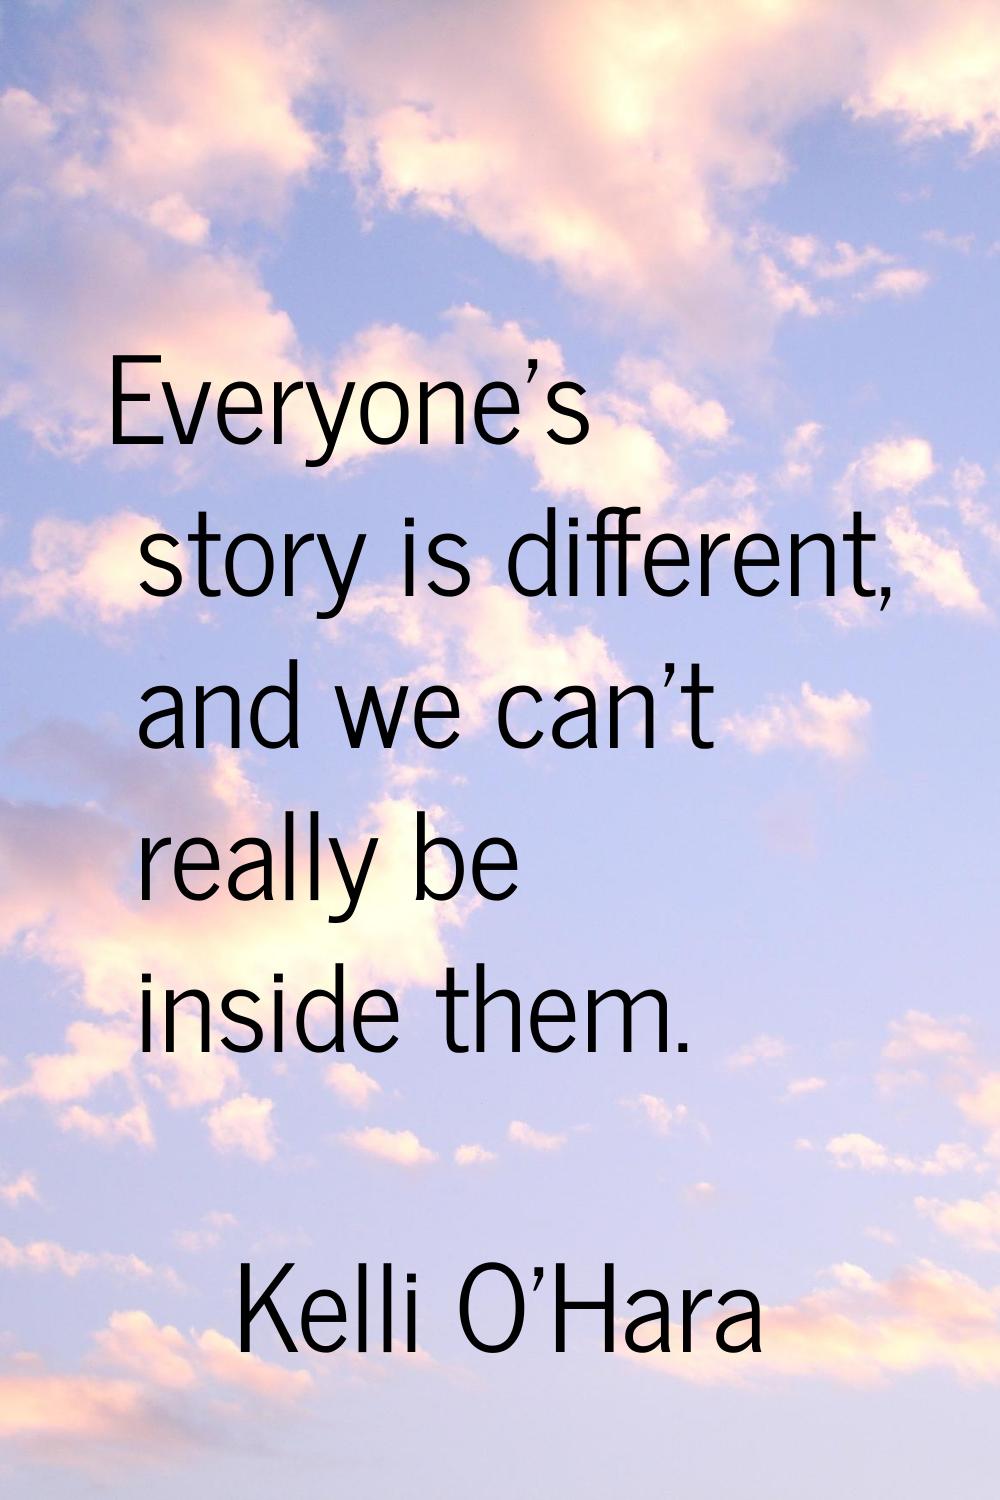 Everyone's story is different, and we can't really be inside them.